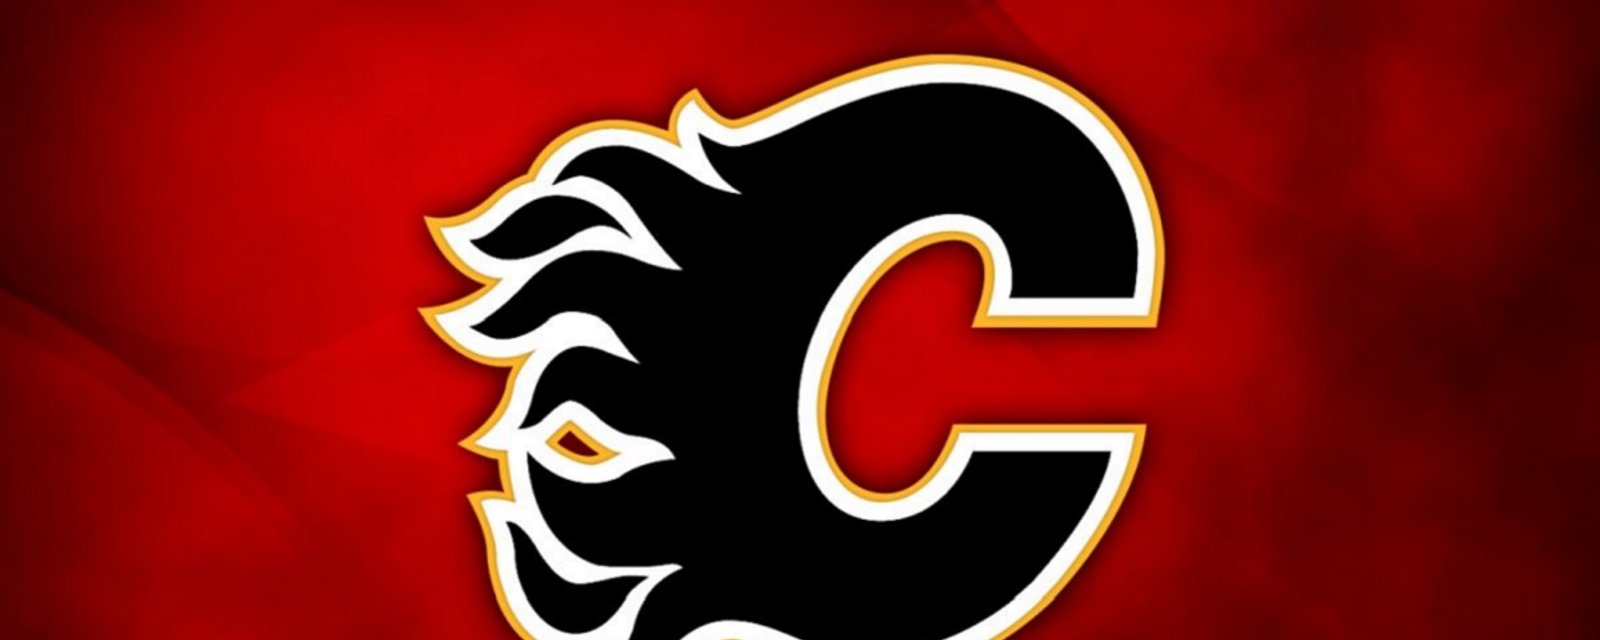 Breaking: Shocking update on the future of the Flames in Calgary.